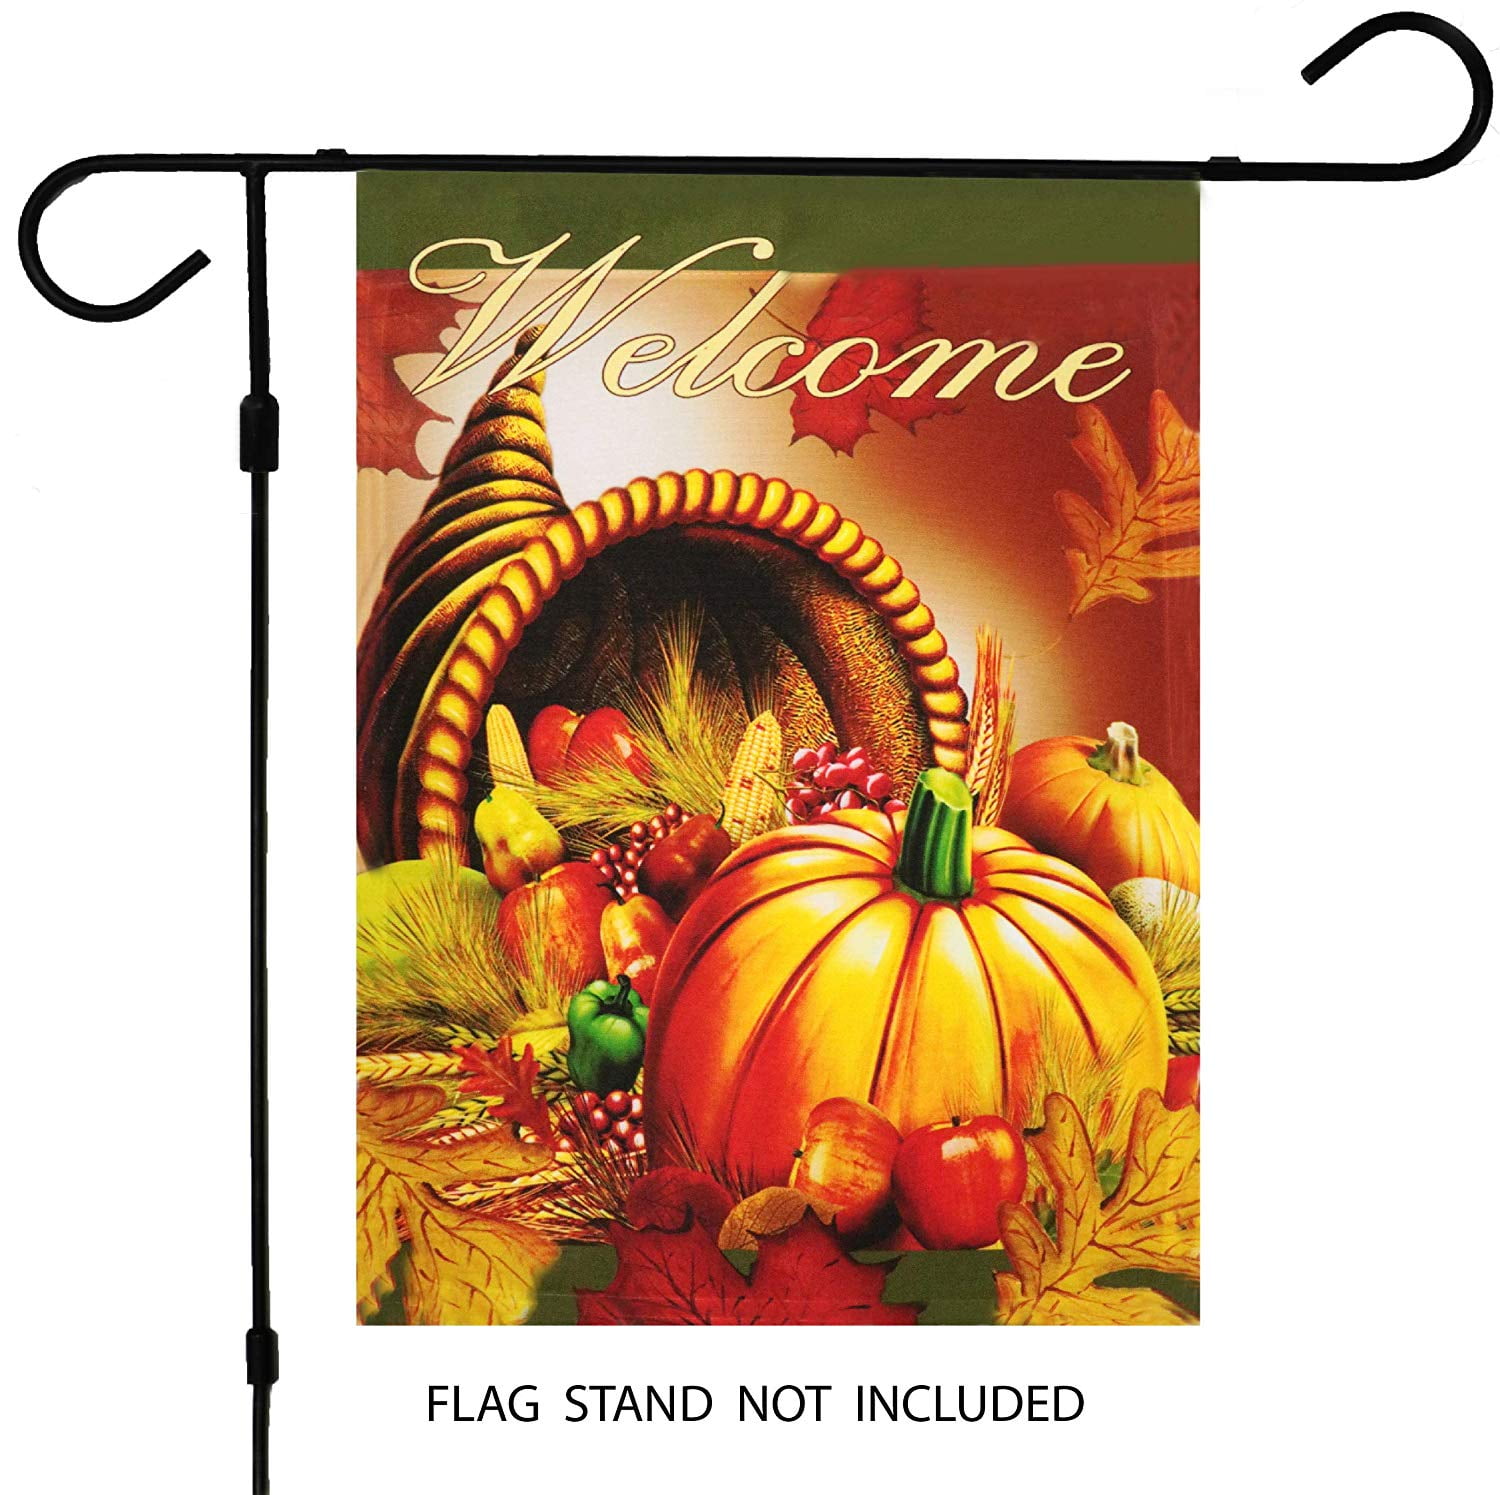 G128 - Home Decorative Fall Garden Flag Welcome Quote, Autumn Maple